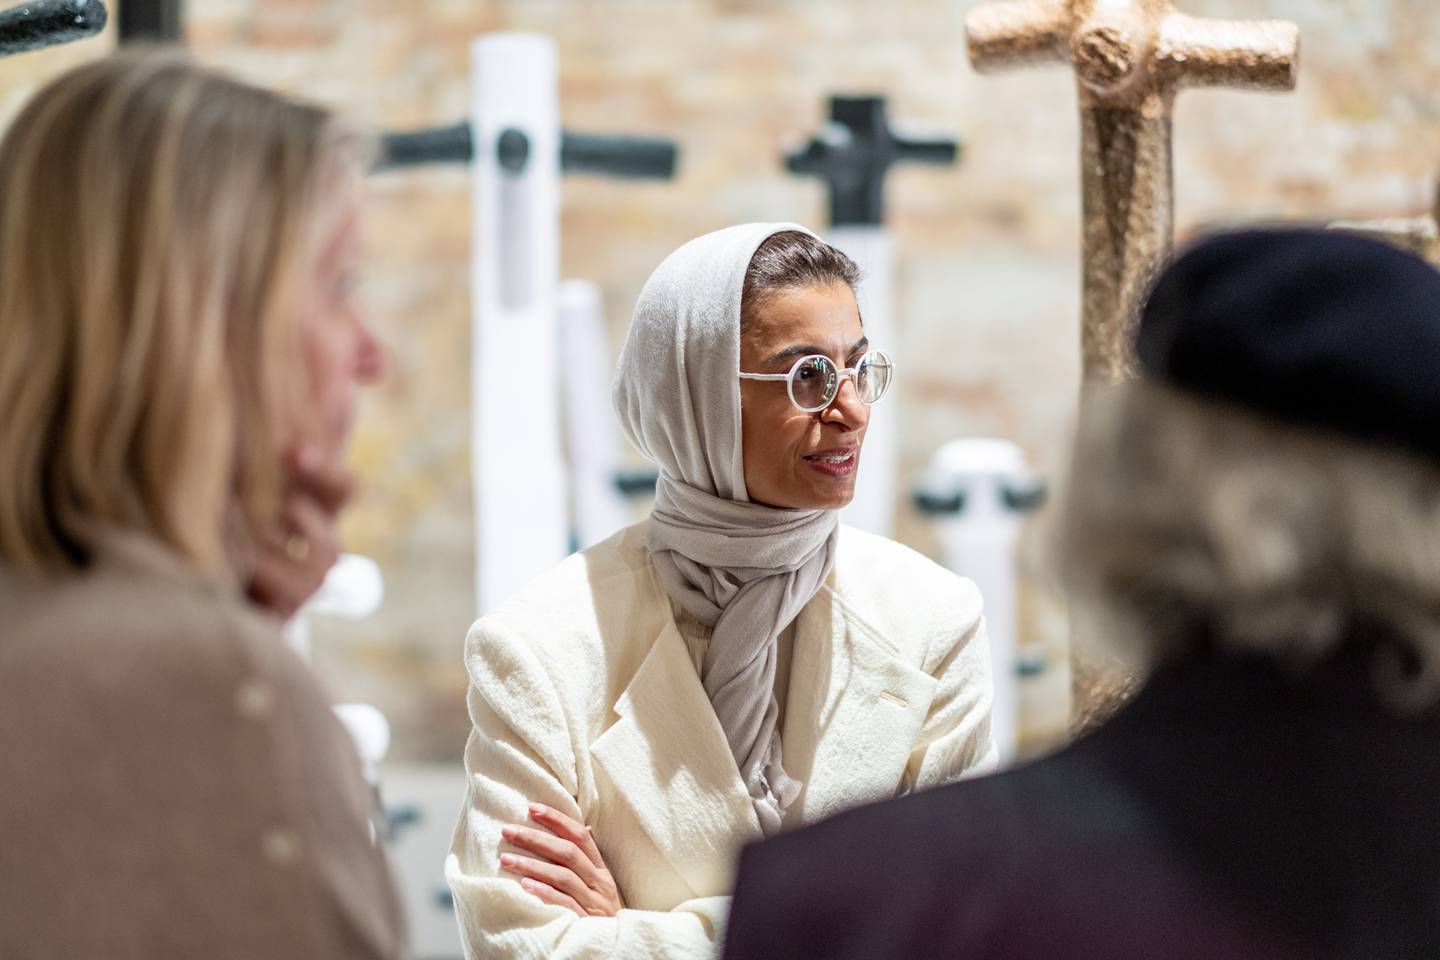 Noura Al Kaabi, the UAE's Minister of Culture and Youth, inaugurated Emirati artist Mohamed Ahmed Ibrahim's exhibition at the Venice Biennale. Photo: National Pavilion UAE